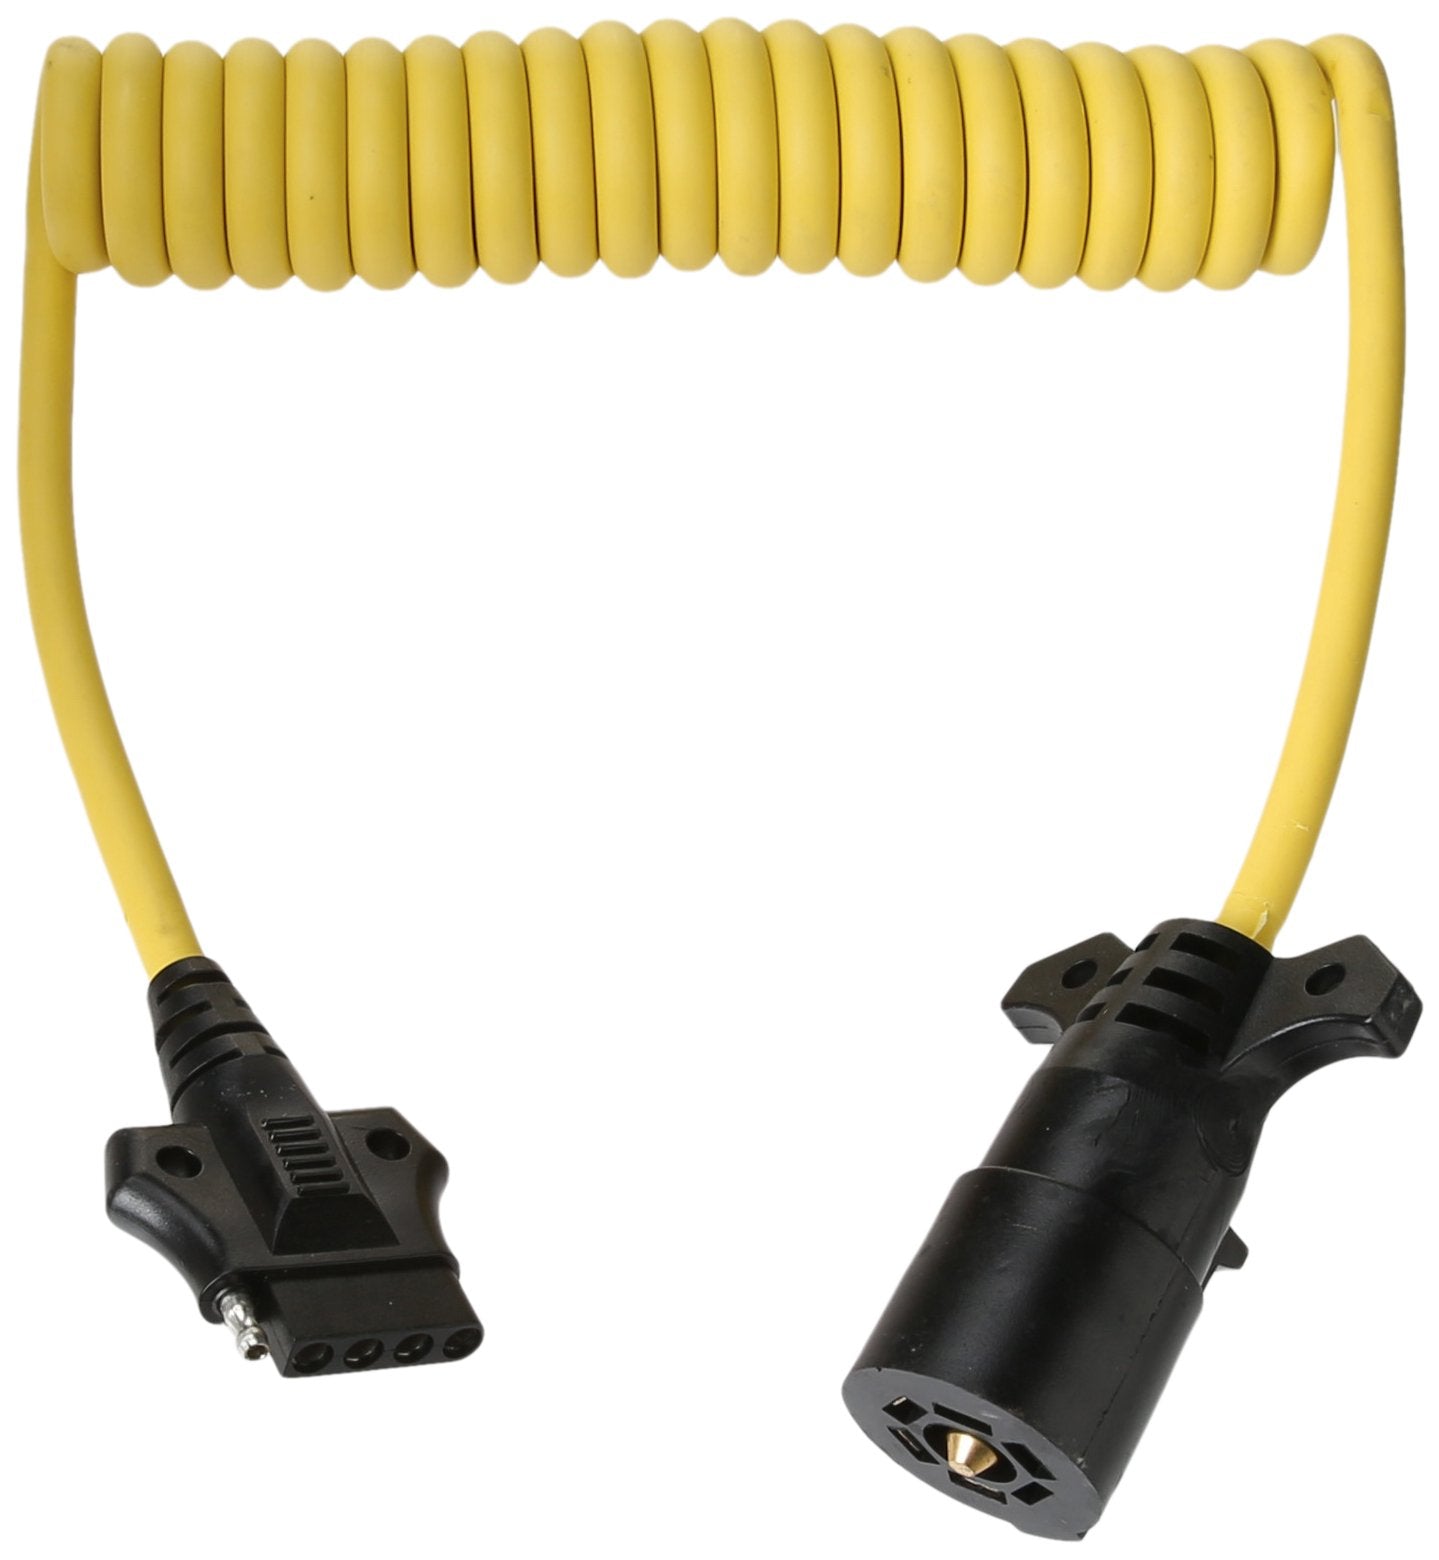 Wesbar 787196 Vehicle/Trailer Coiled Wire Jumper, 7-Way to 5-Way, 8'